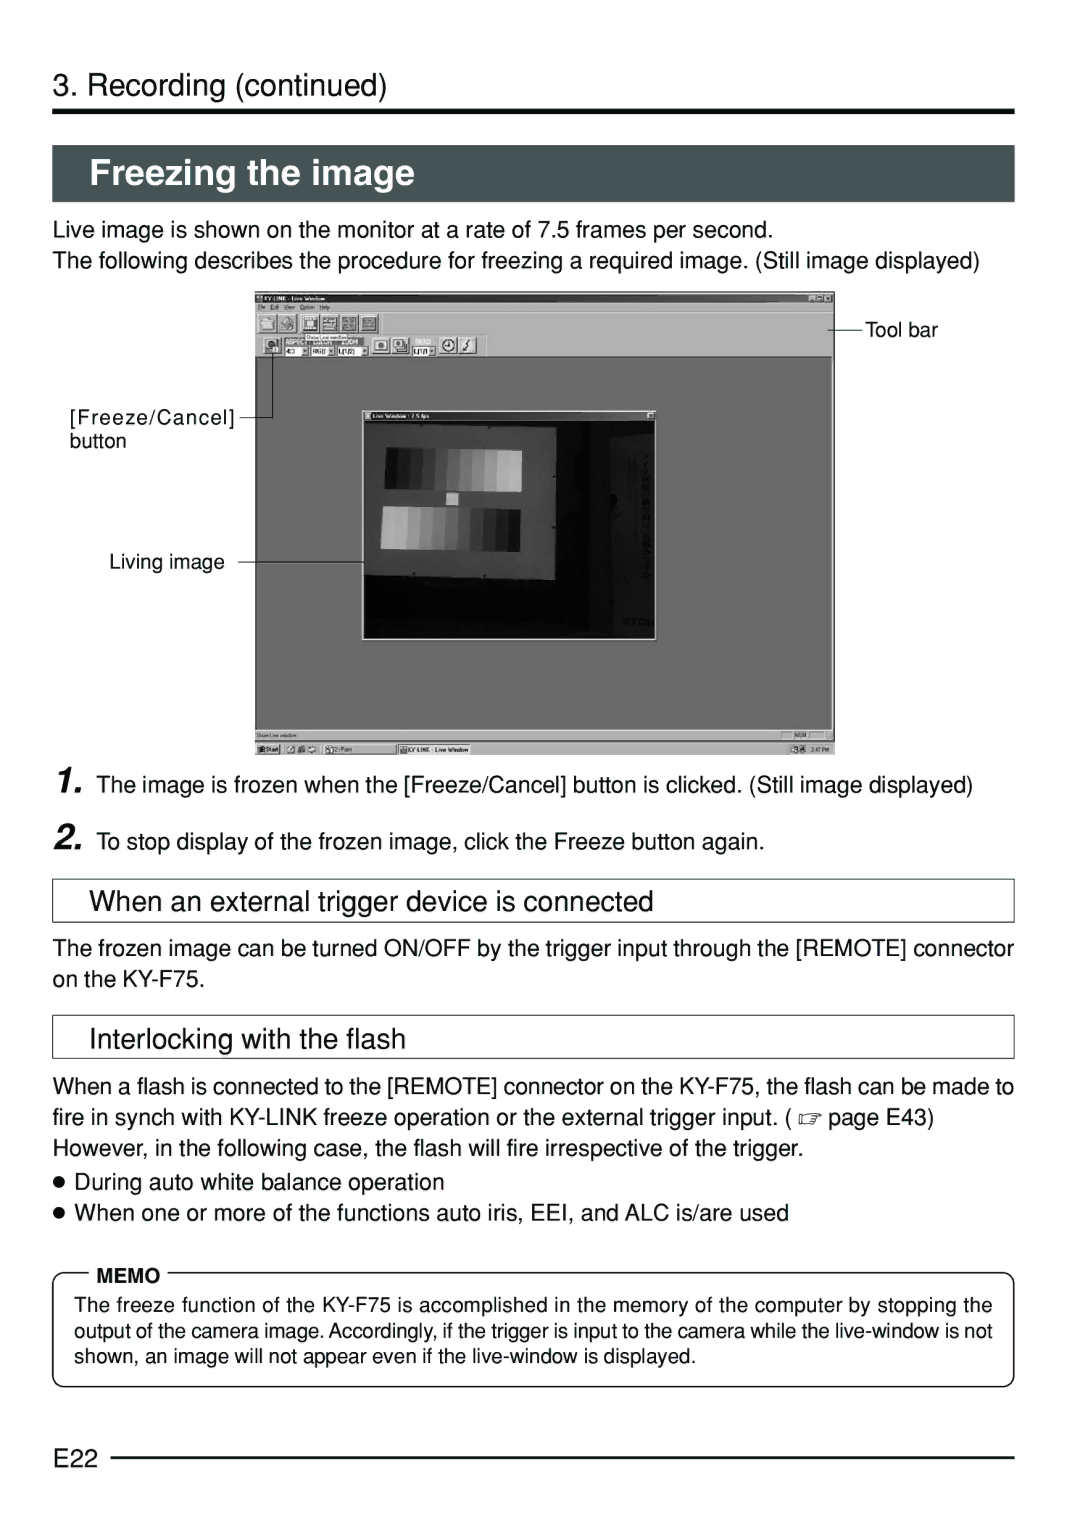 JVC KY-F75 manual Freezing the image, When an external trigger device is connected, Interlocking with the flash, E22 